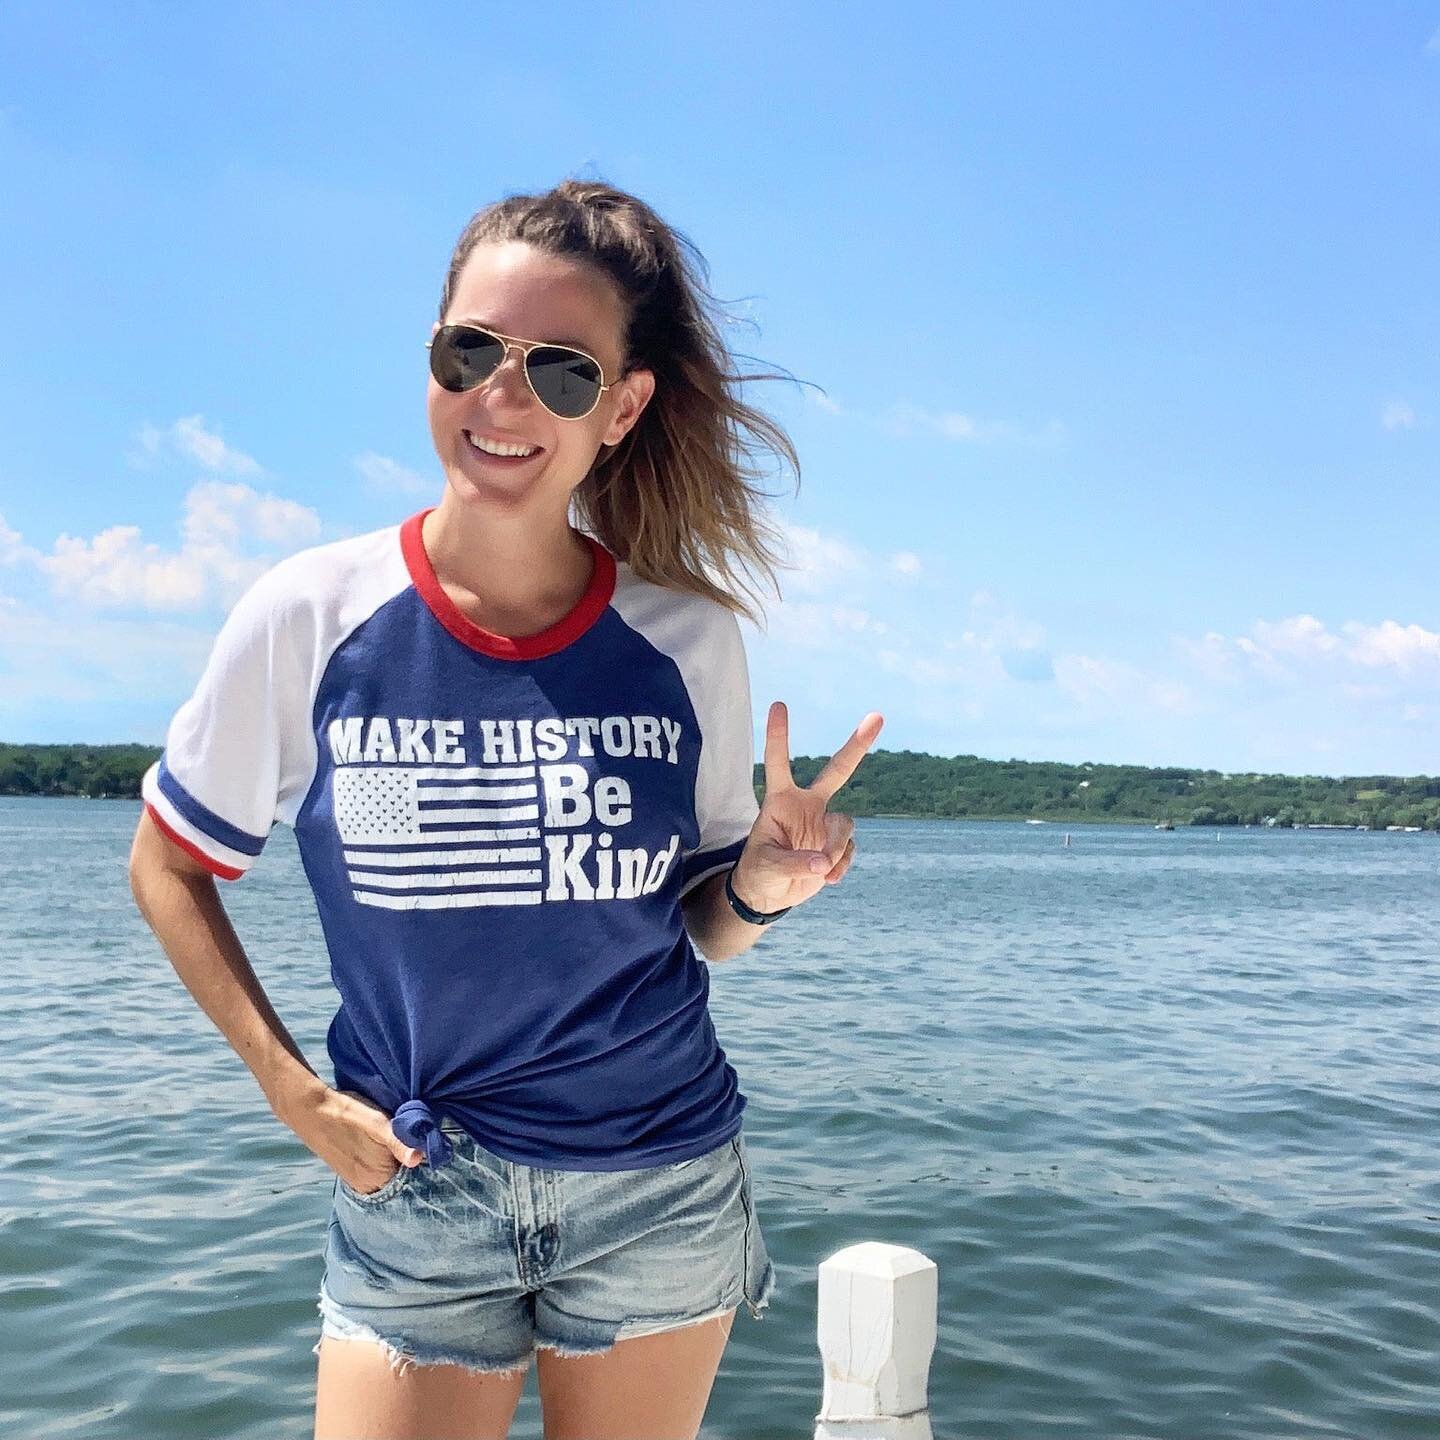 💙🇺🇸❤️ MEMORIAL DAY SALE ❤️🇺🇸💙
Get all your gear now so you&rsquo;re ready to honor &amp; remember! Tees, Tanks, Hoodies &amp; Mugs! 30% off with code: MEMORIALDAY
⠀⠀⠀⠀⠀⠀⠀⠀⠀
#memorialday #everykind #youfithere #makehistory #bekind